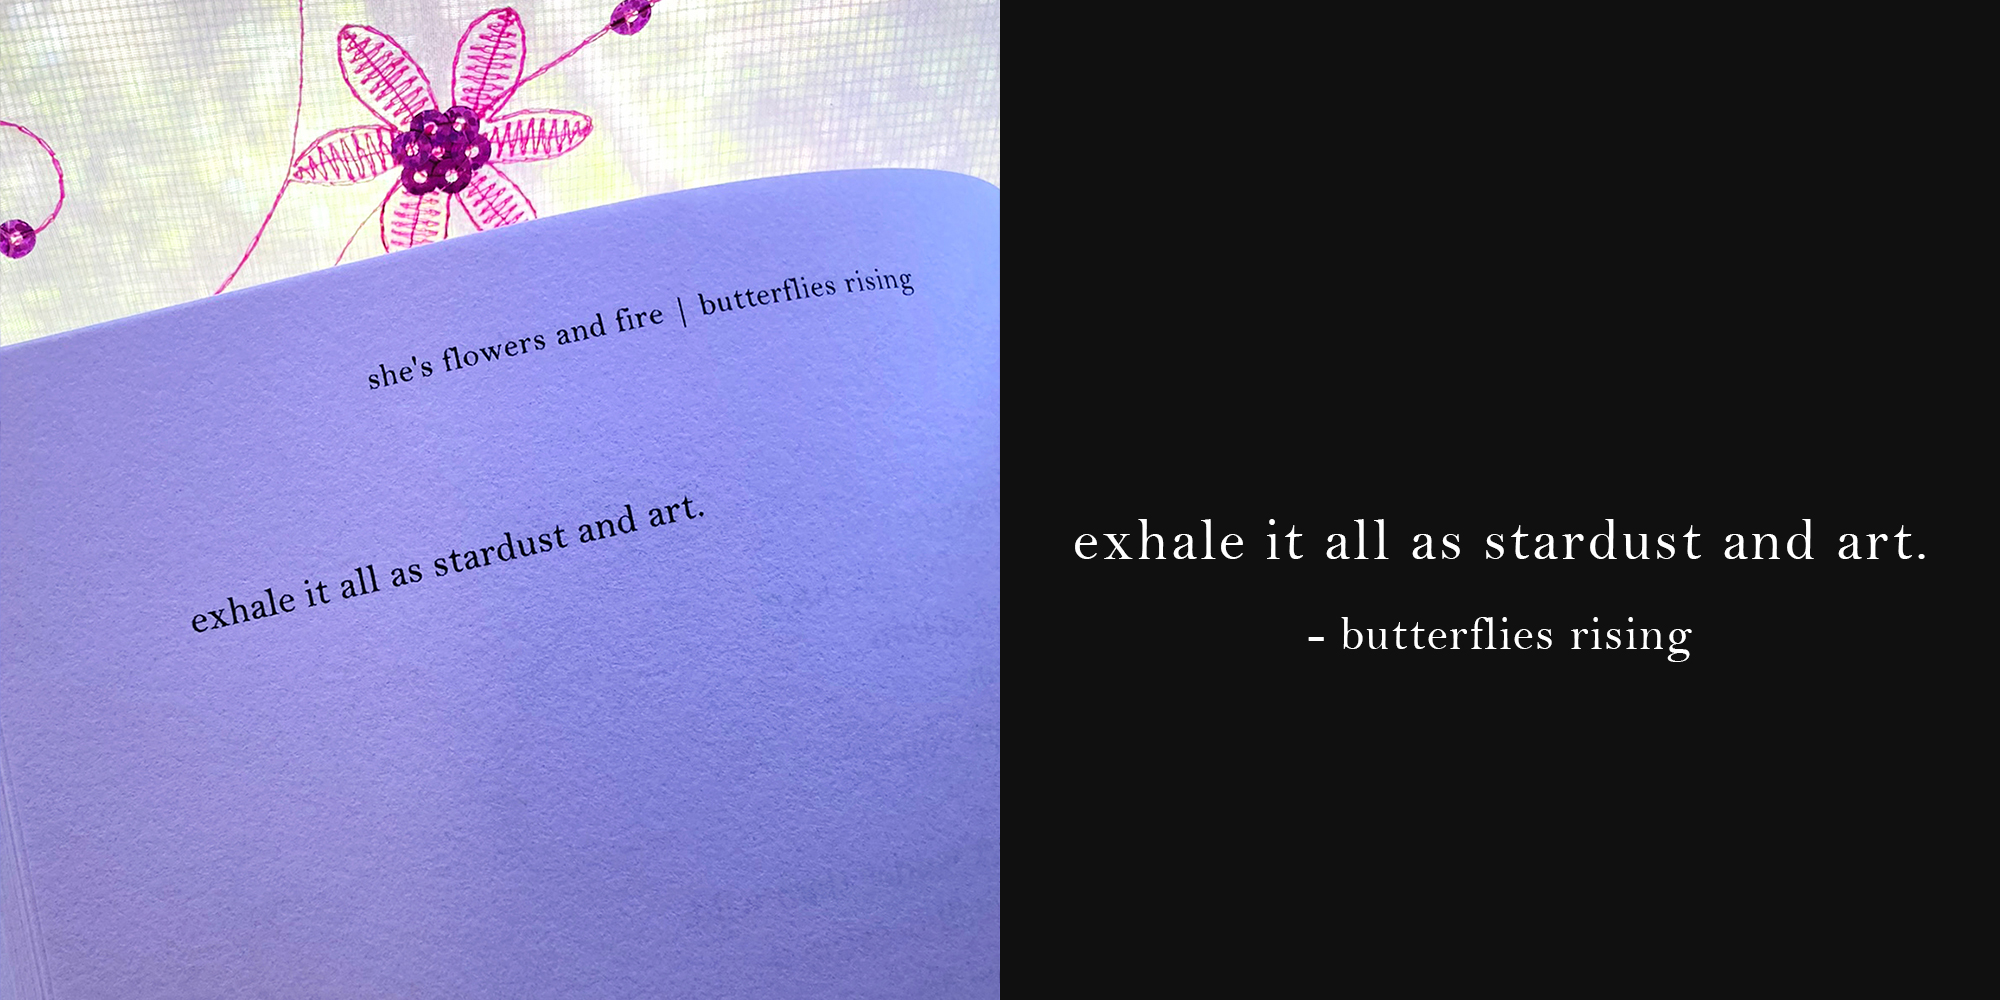 exhale it all as stardust and art - butterflies rising